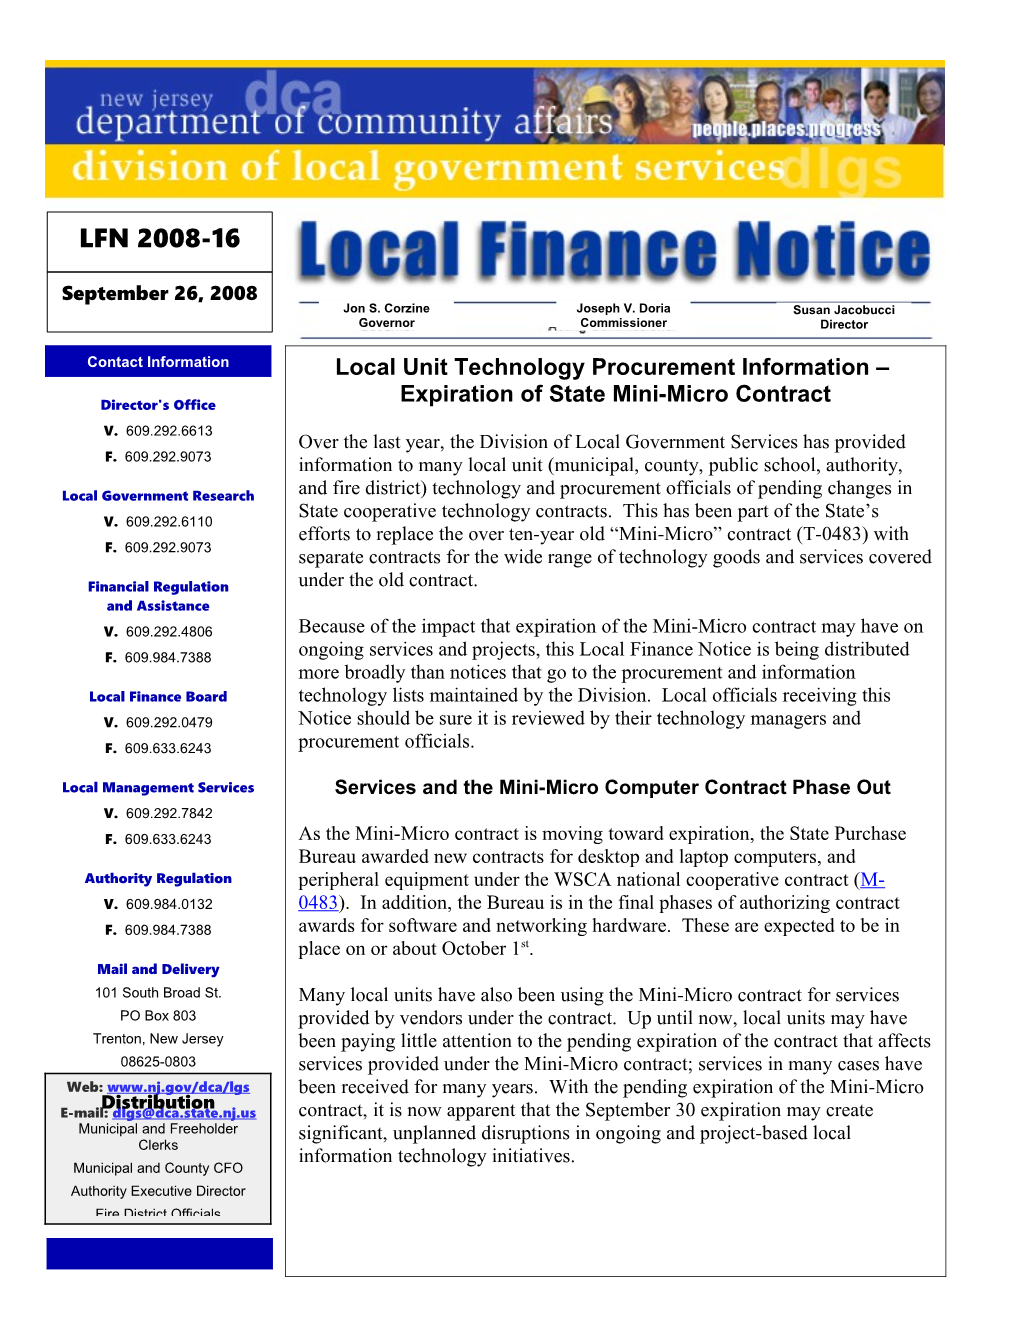 Local Finance Notice 2008-169/26/08Page 1